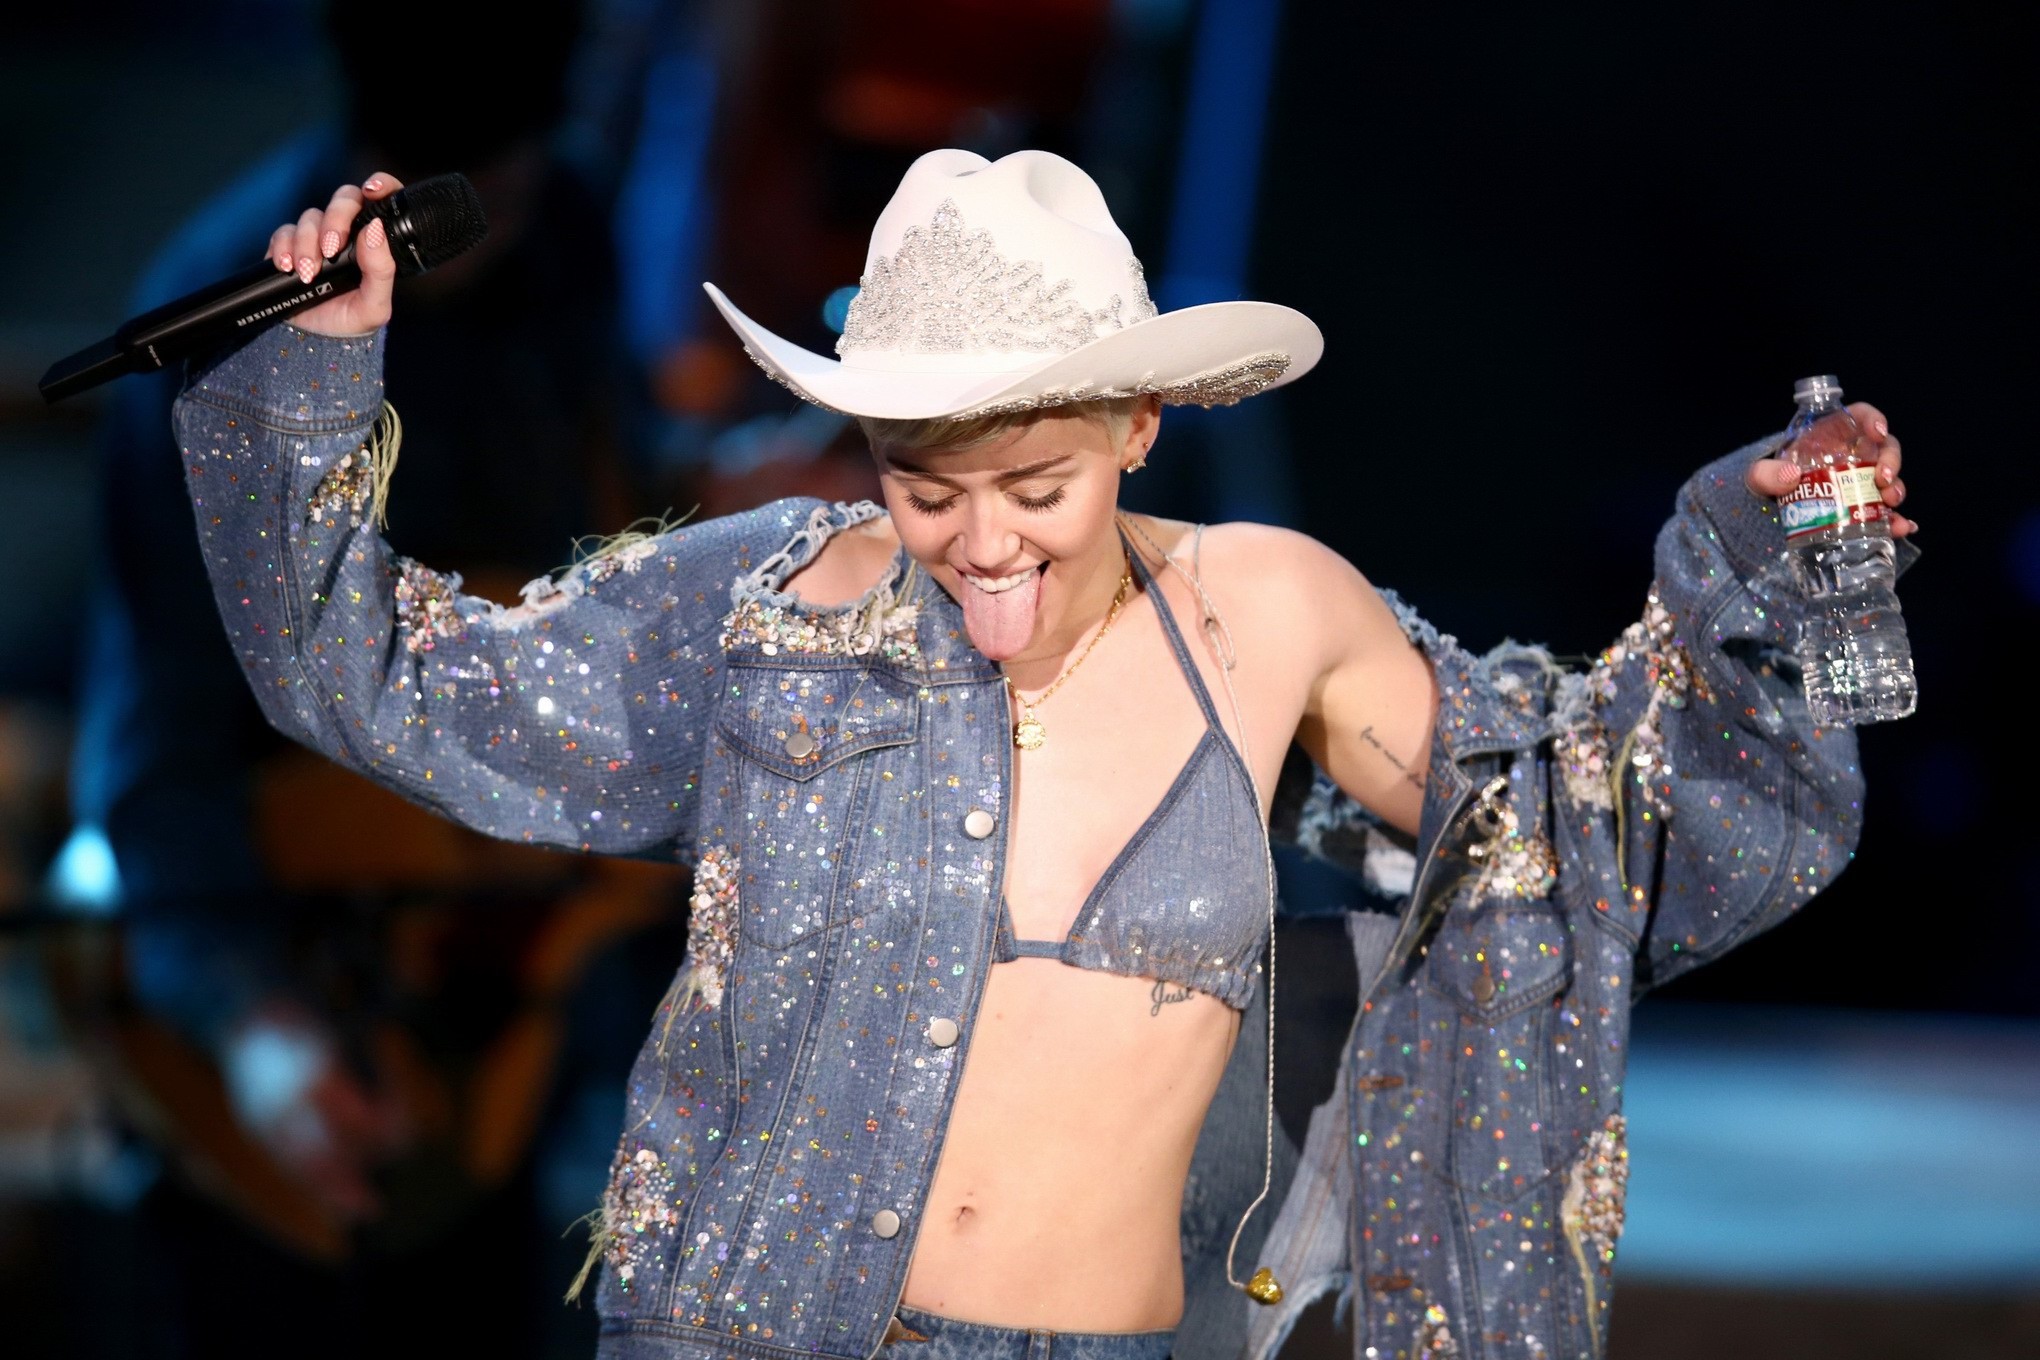 Miley Cyrus perofrming in denim bra  ripped jeans at MTV Unplugged in Hollywood  #75205871